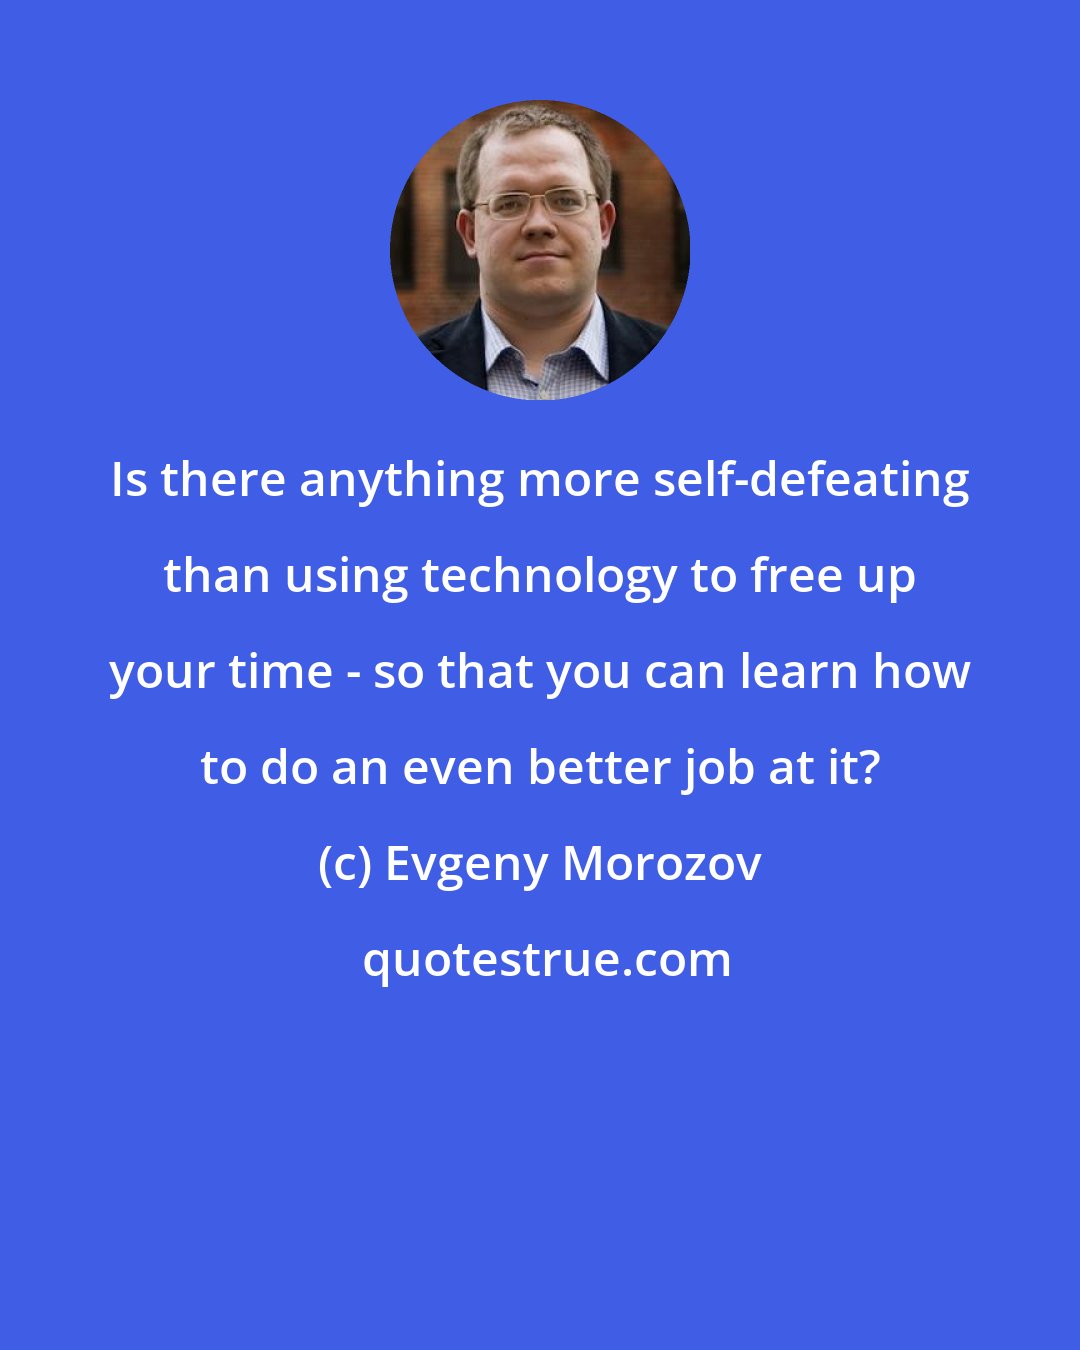 Evgeny Morozov: Is there anything more self-defeating than using technology to free up your time - so that you can learn how to do an even better job at it?